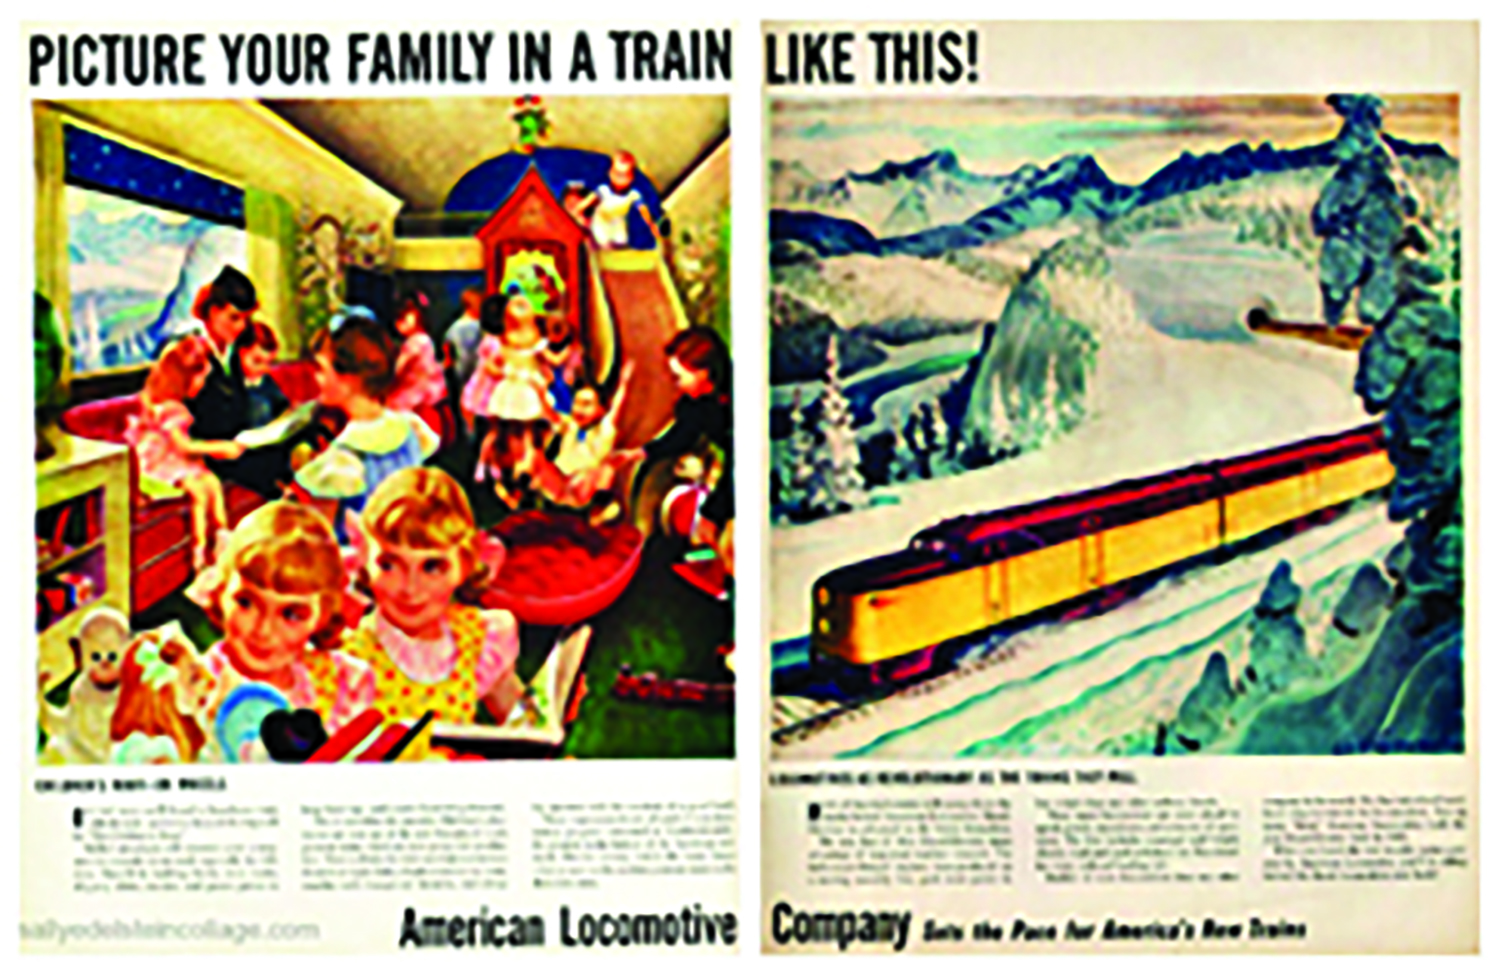 Train travel the mode of transportation that never goes out of style